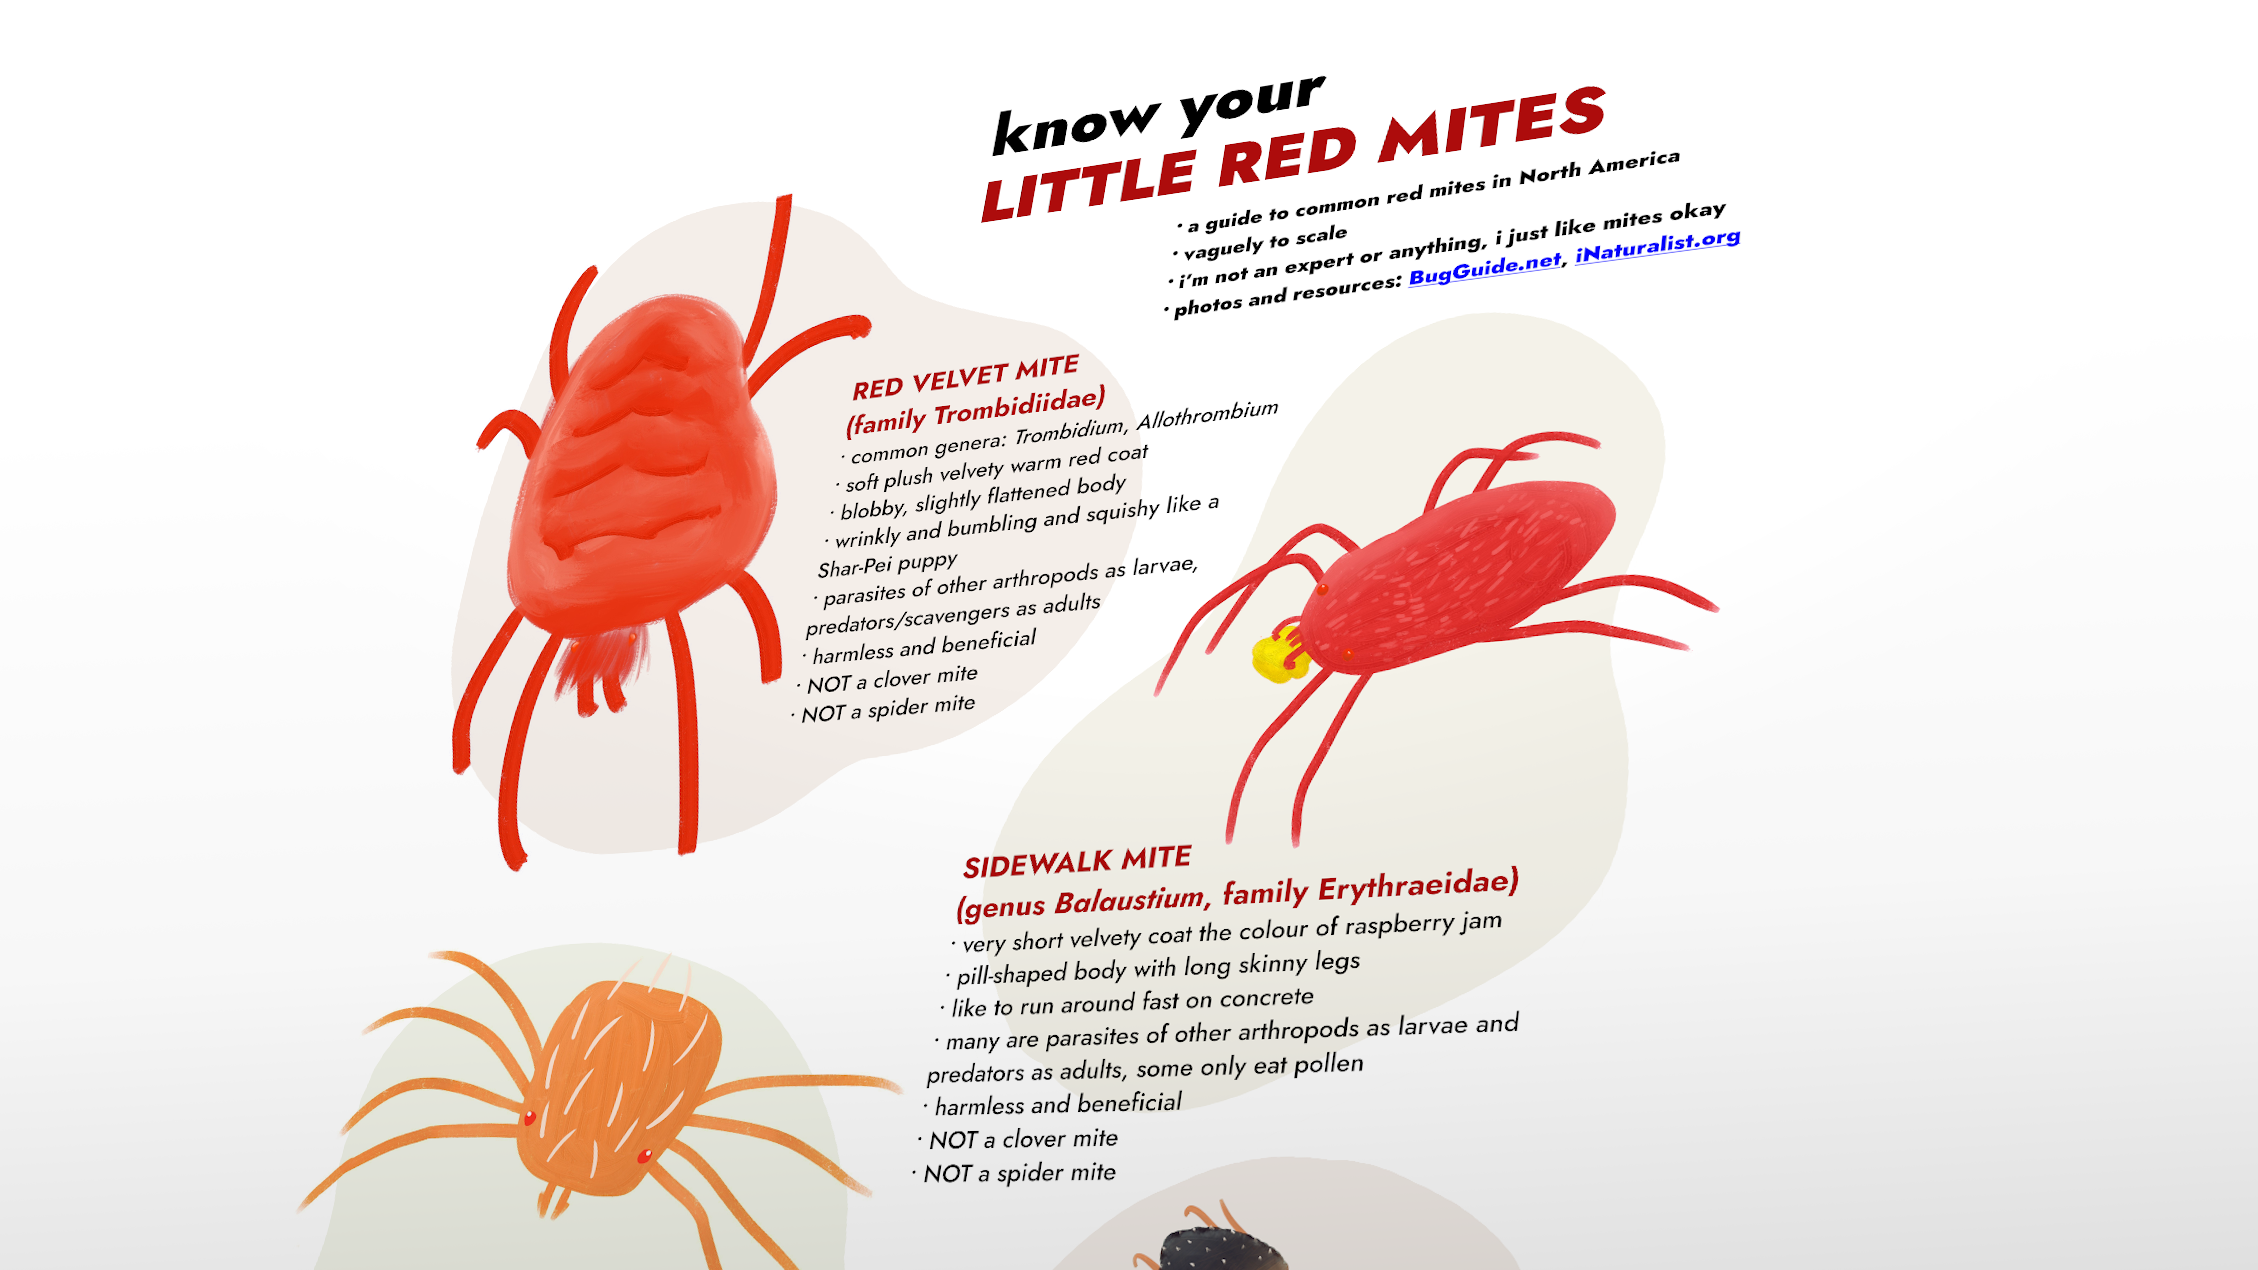 Tilted version of "Know Your Little Red Mites" infographic